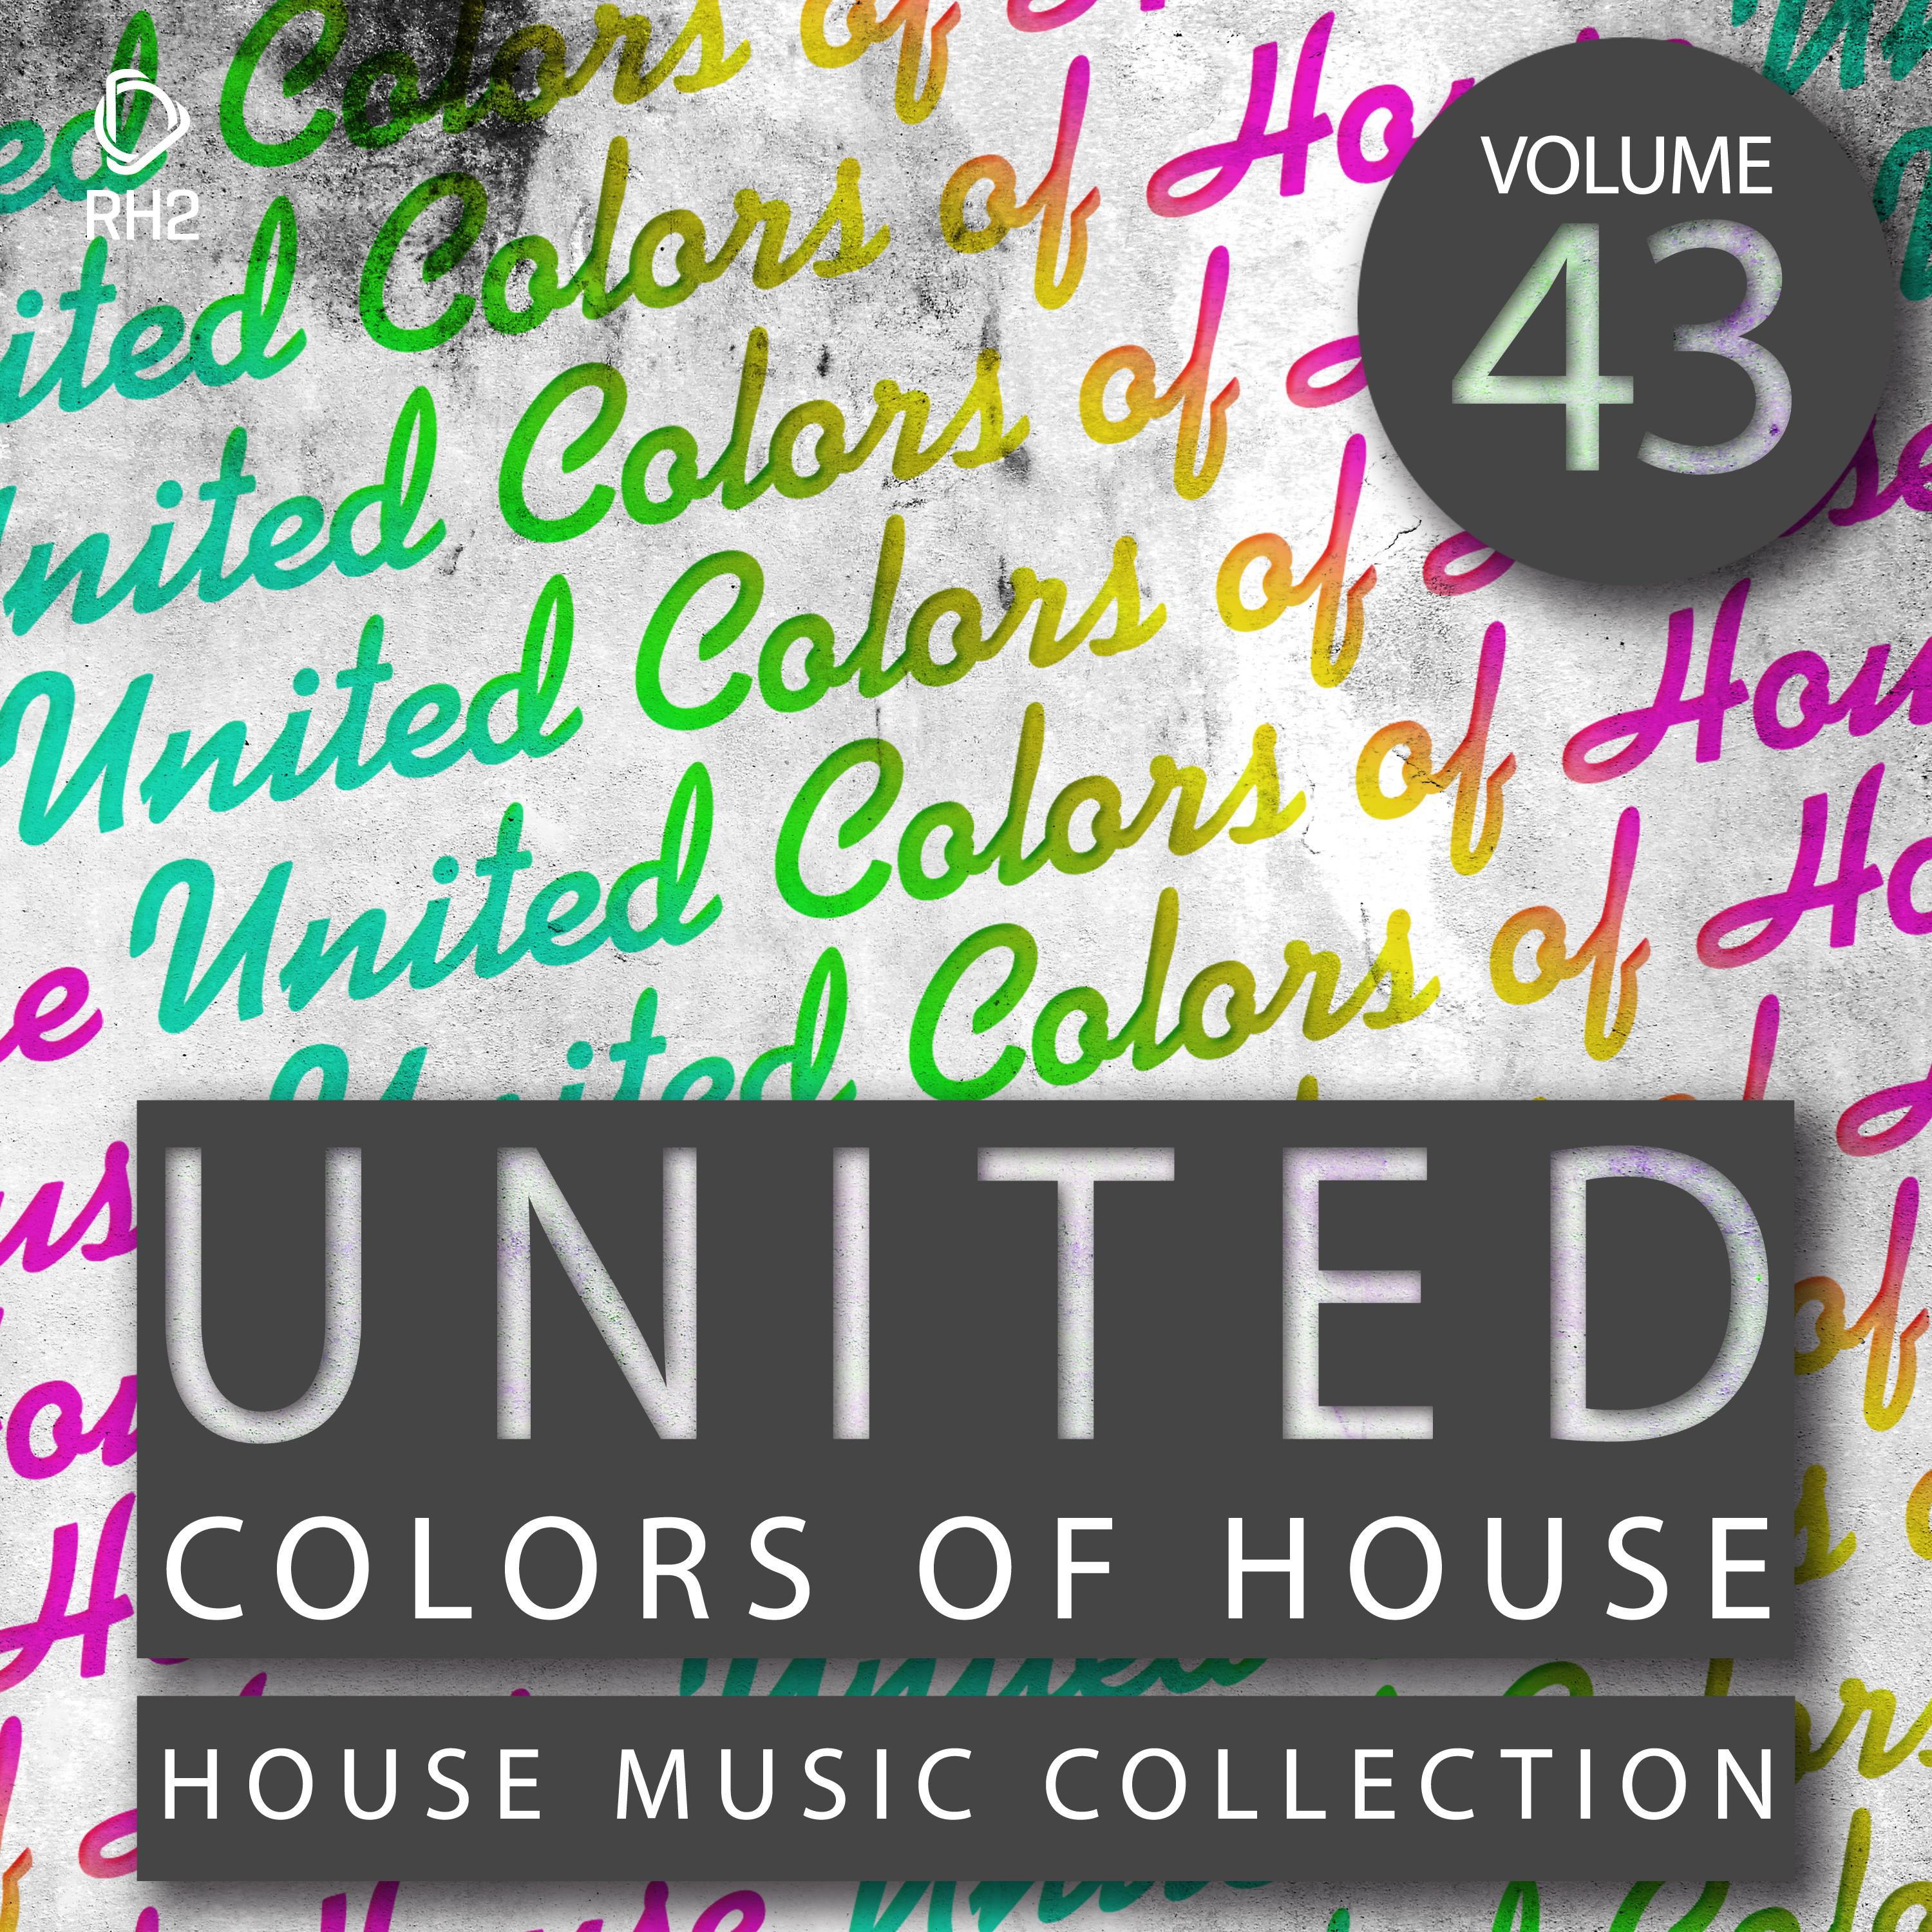 United Colors of House, Vol. 43